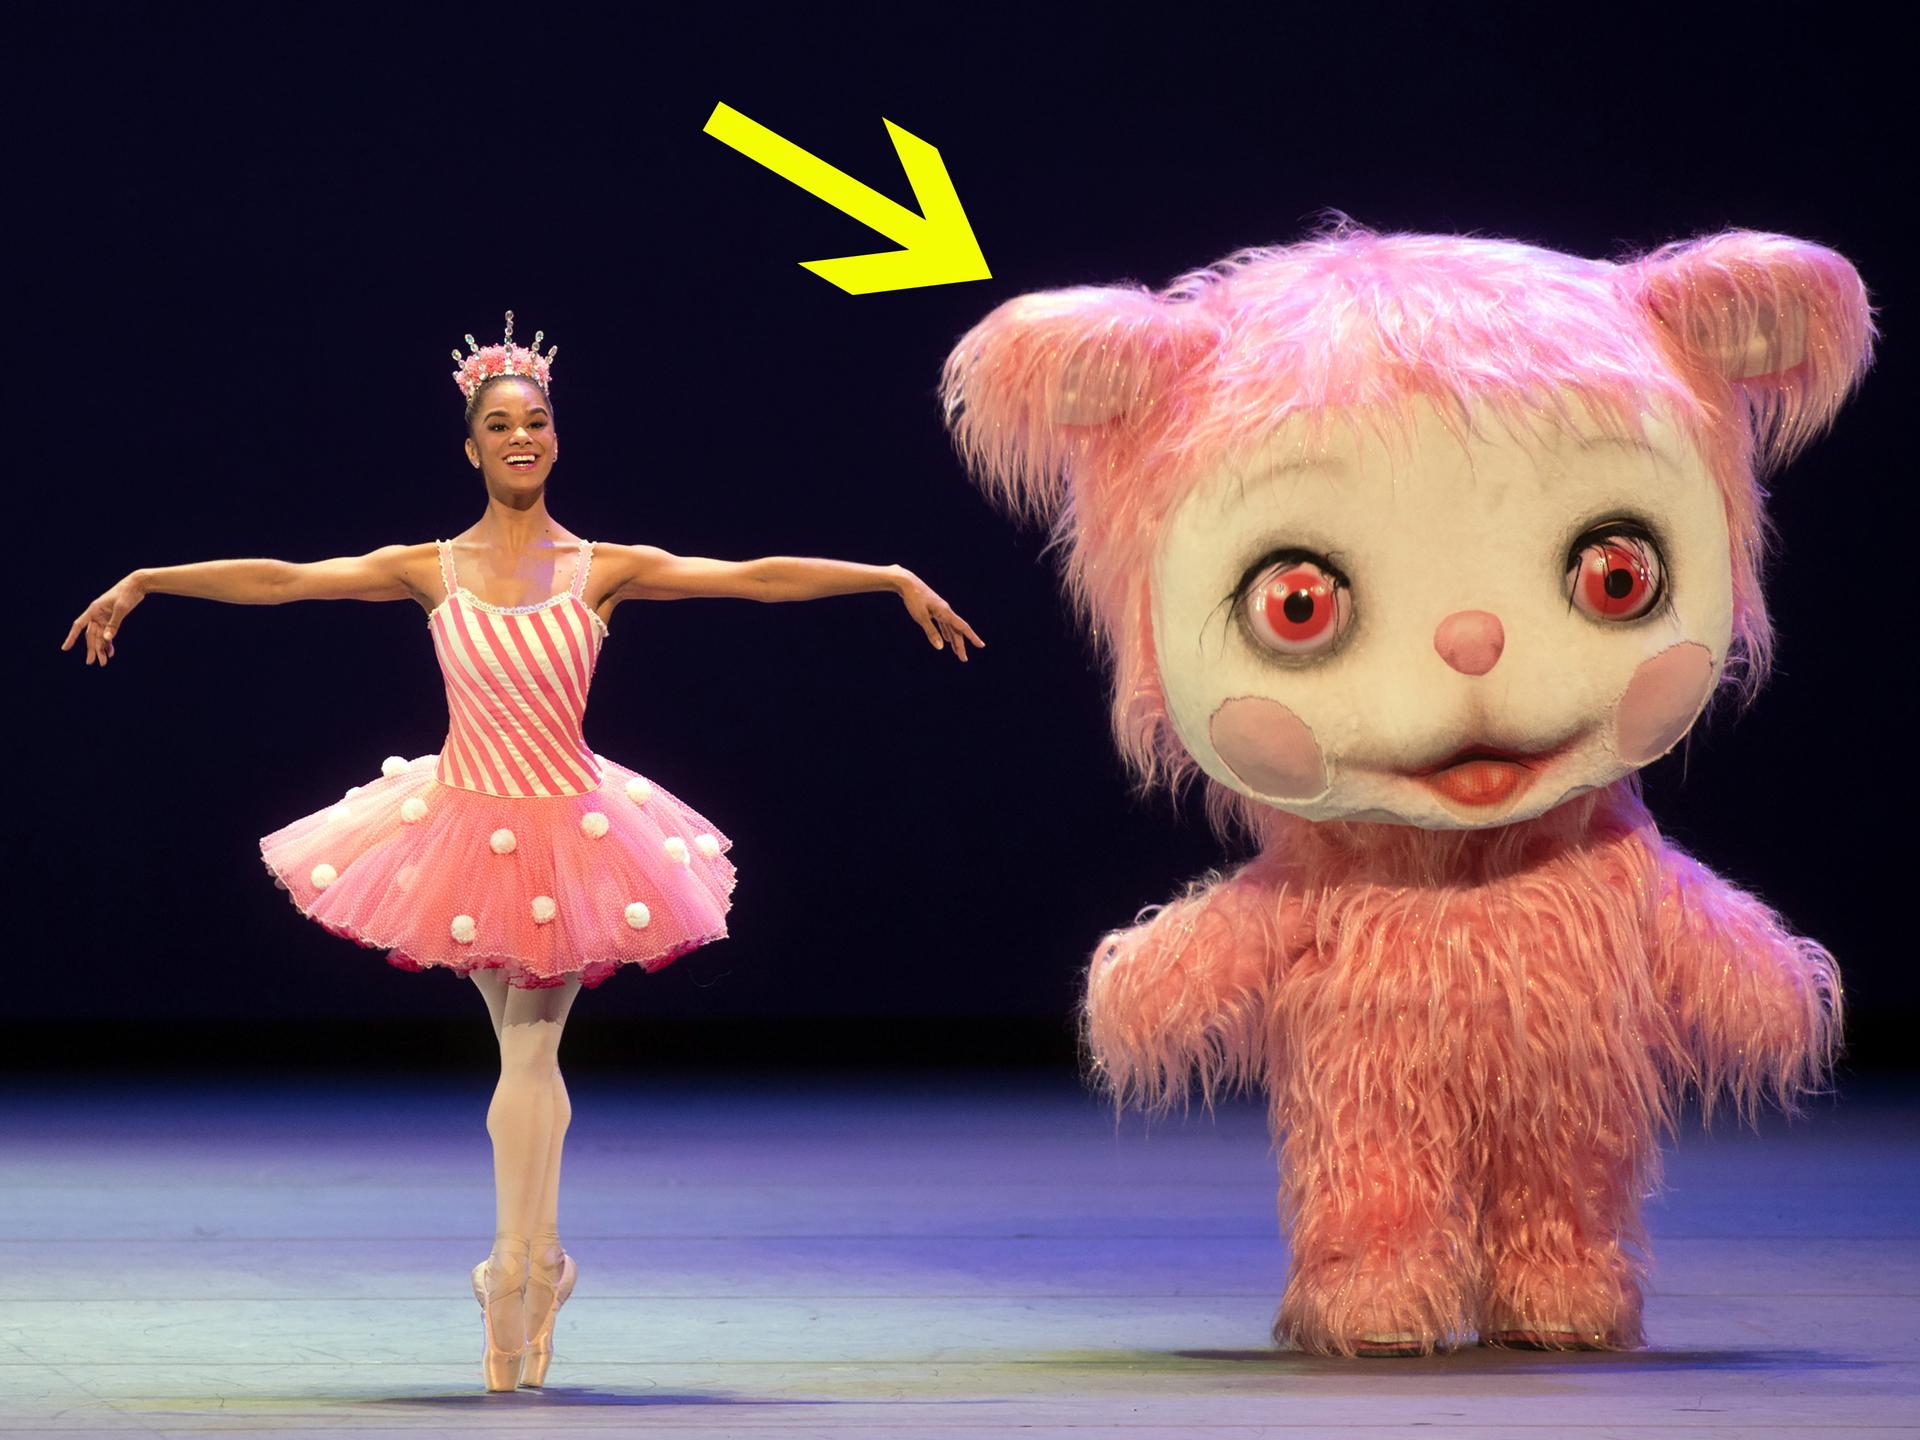 Iggy Berlin as The Pink Yak with Misty Copeland in “Whipped Cream.”